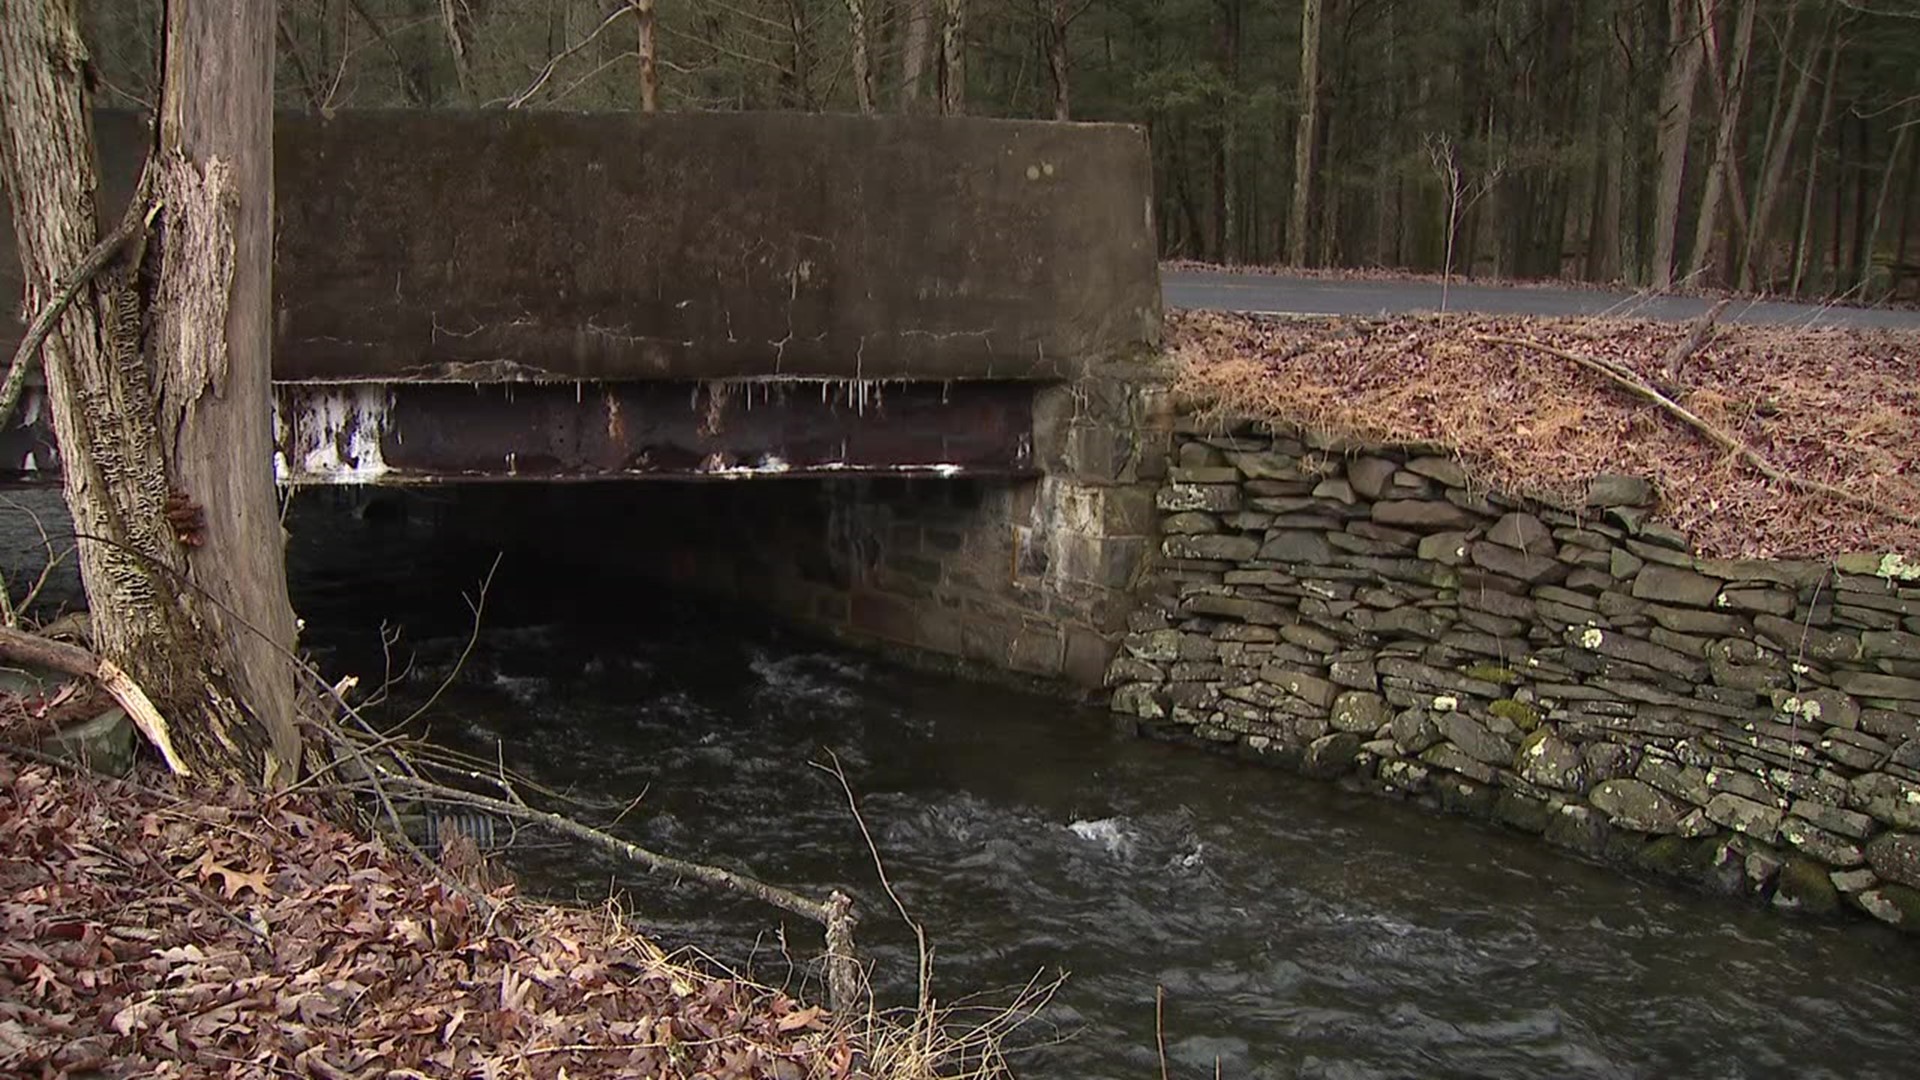 The name of the waterways that run through several Pocono communities contains a term that is considered derogatory.